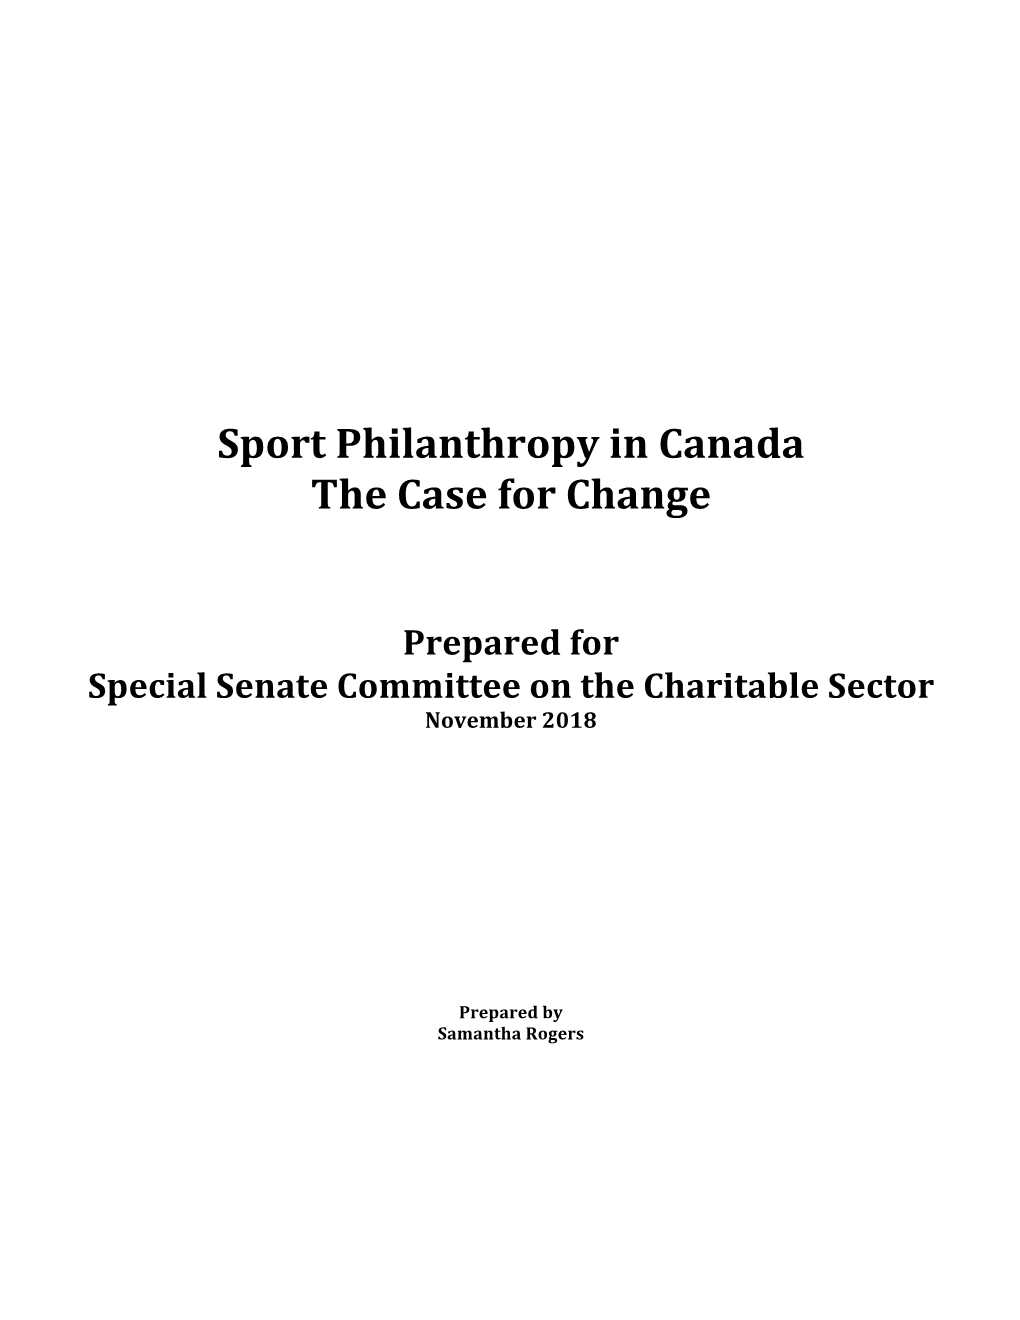 Sport Philanthropy in Canada the Case for Change